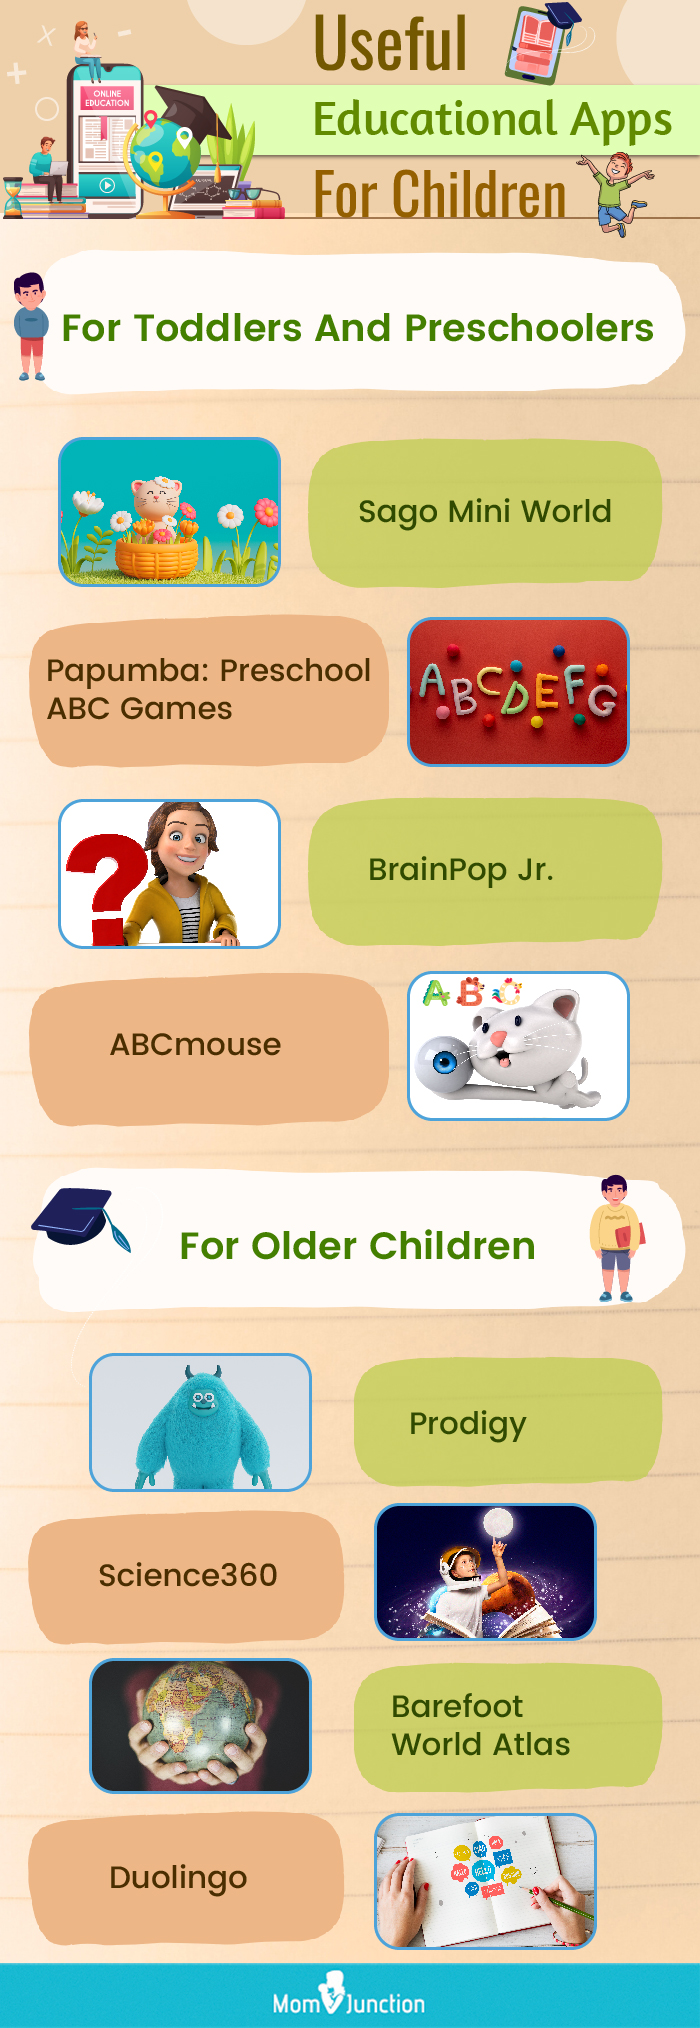 useful educational apps for children (infographic)